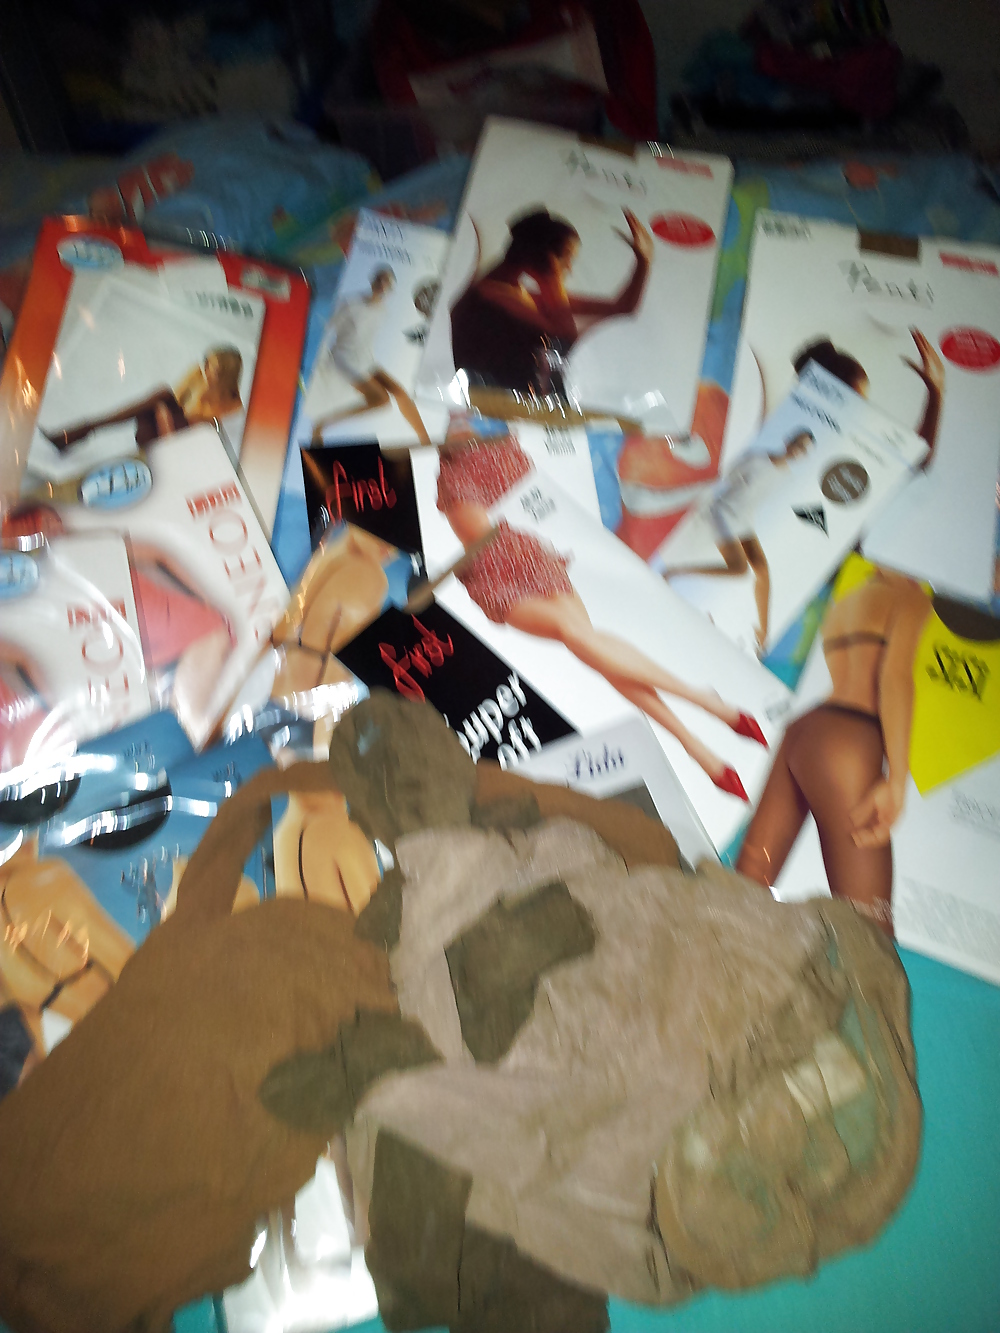 My new pantyhose collection #20014994